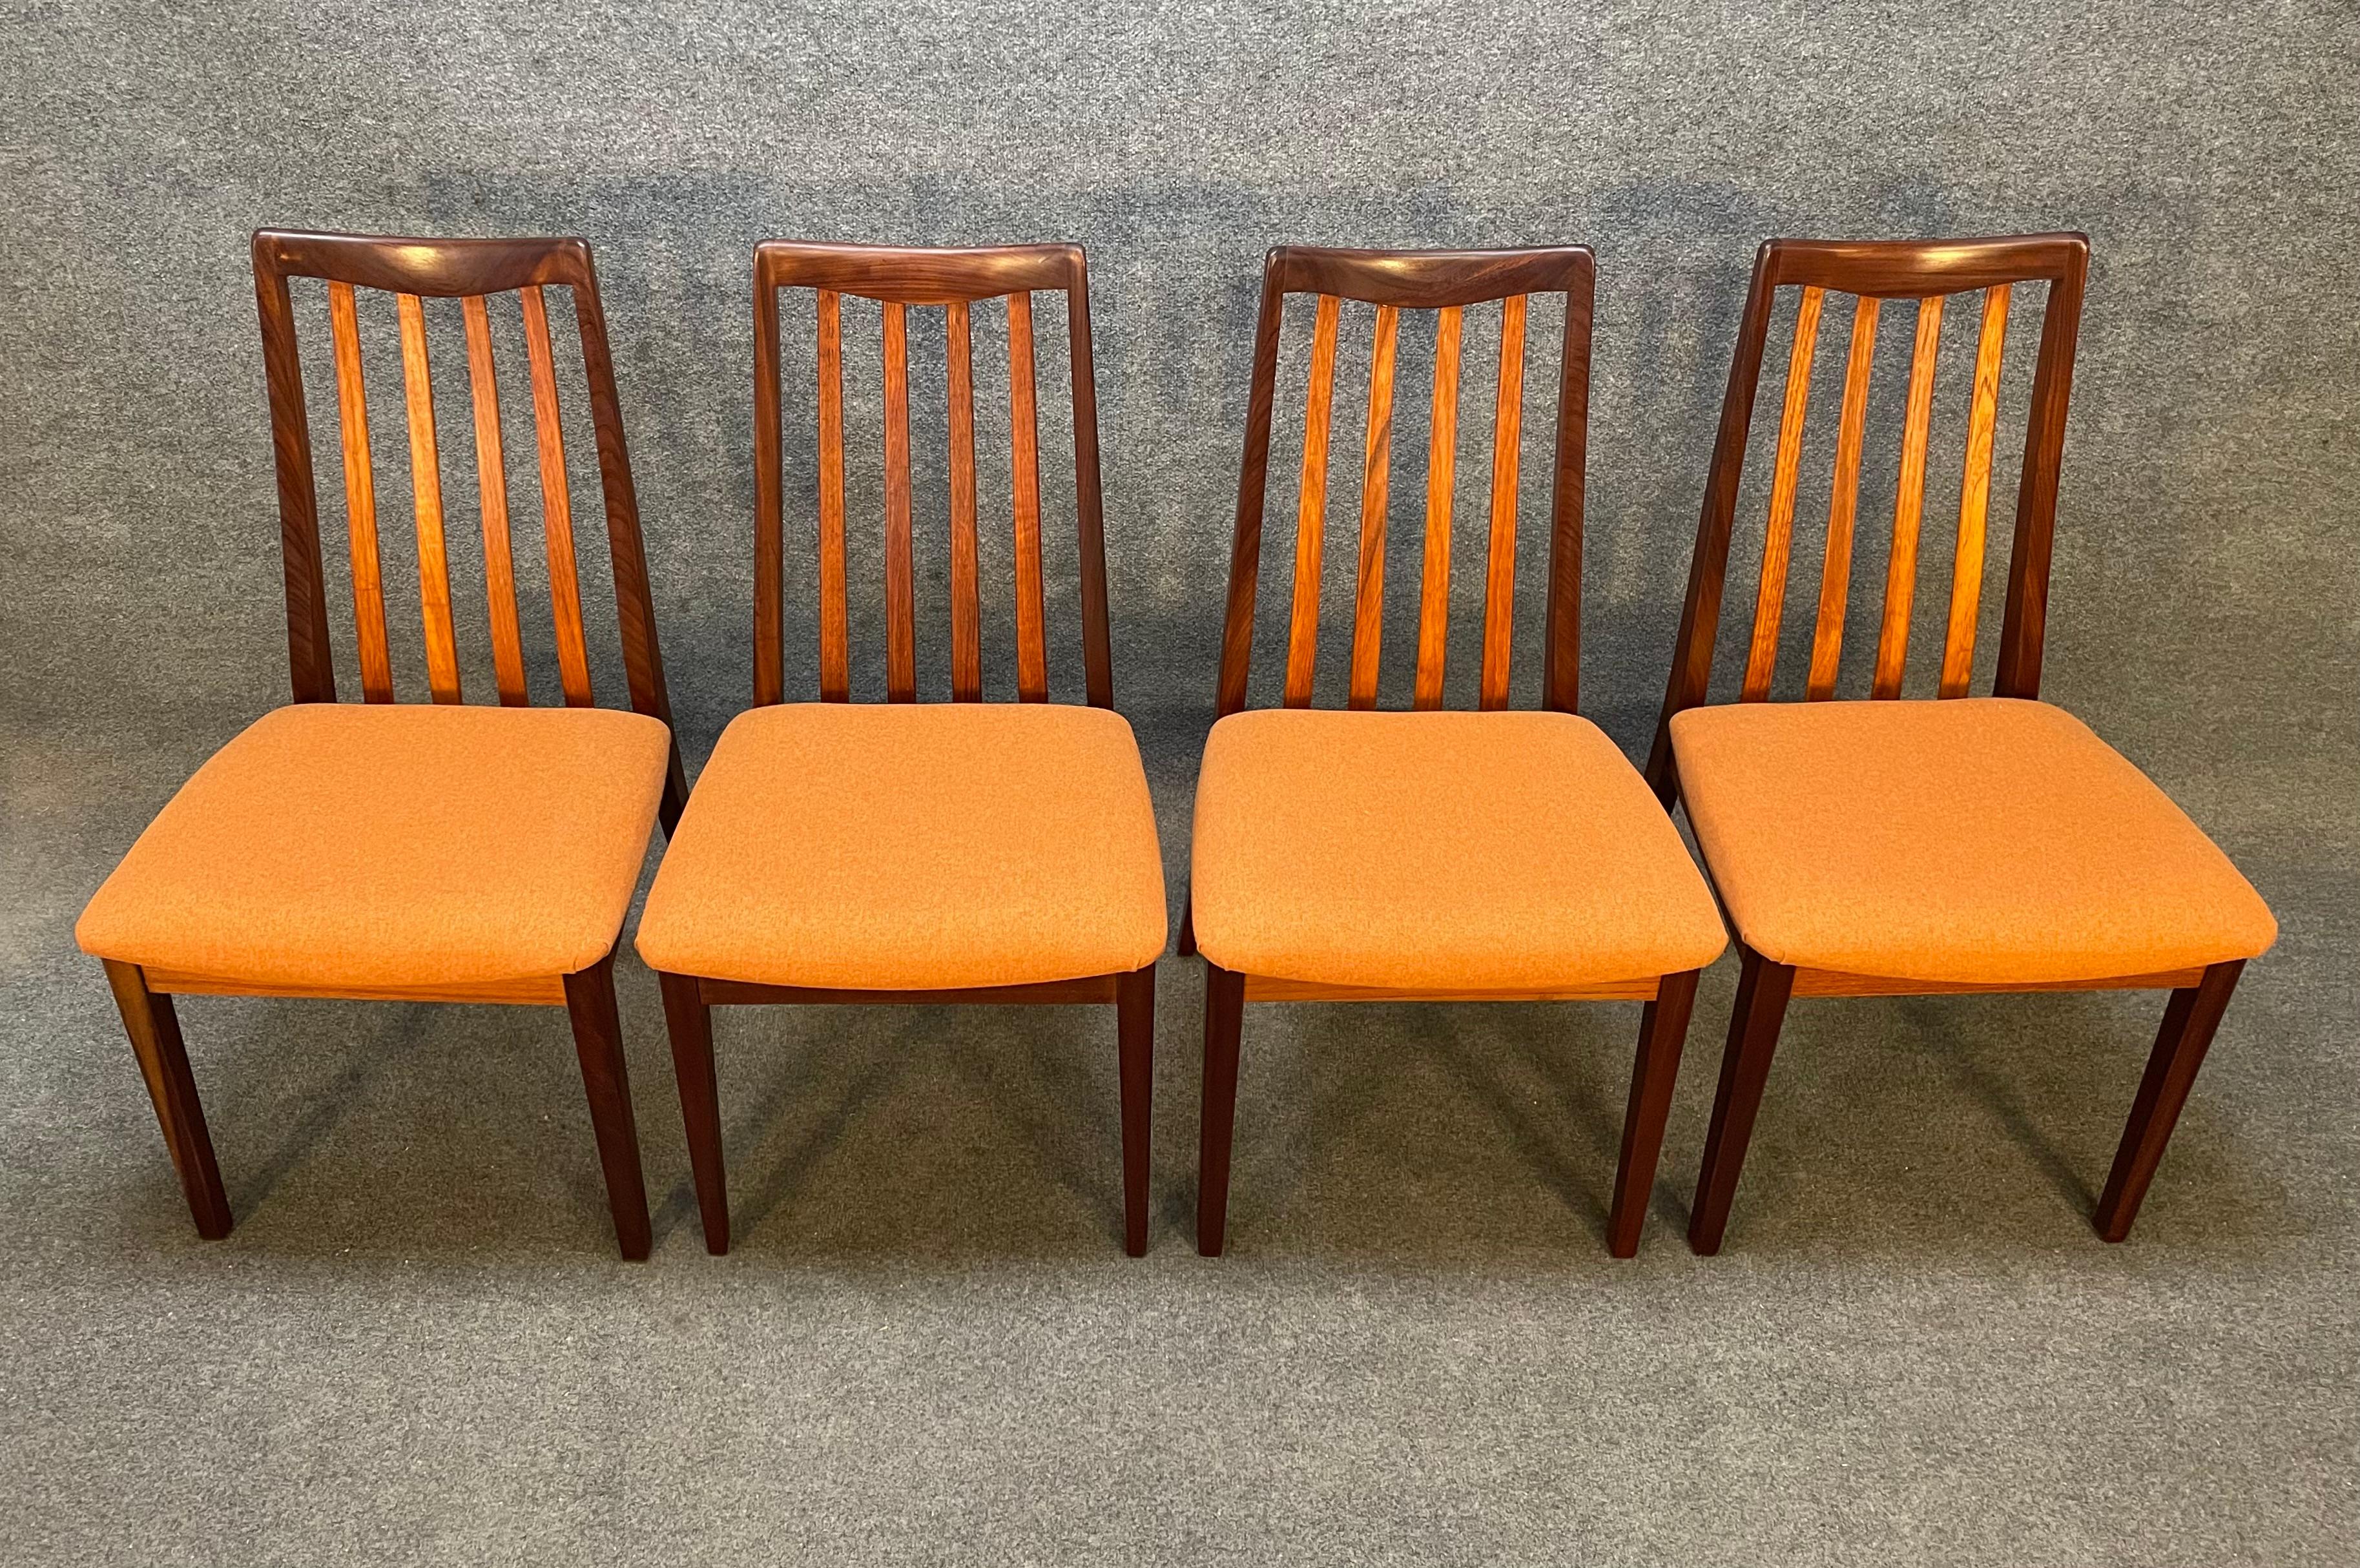 Here is a set of four beautiful British Mid-Century Modern teak dining chairs manufactured by G Plan in the 1960's.
These comfortable high back chairs, recently imported from England to California before their refinishing, feature a vibrant wood